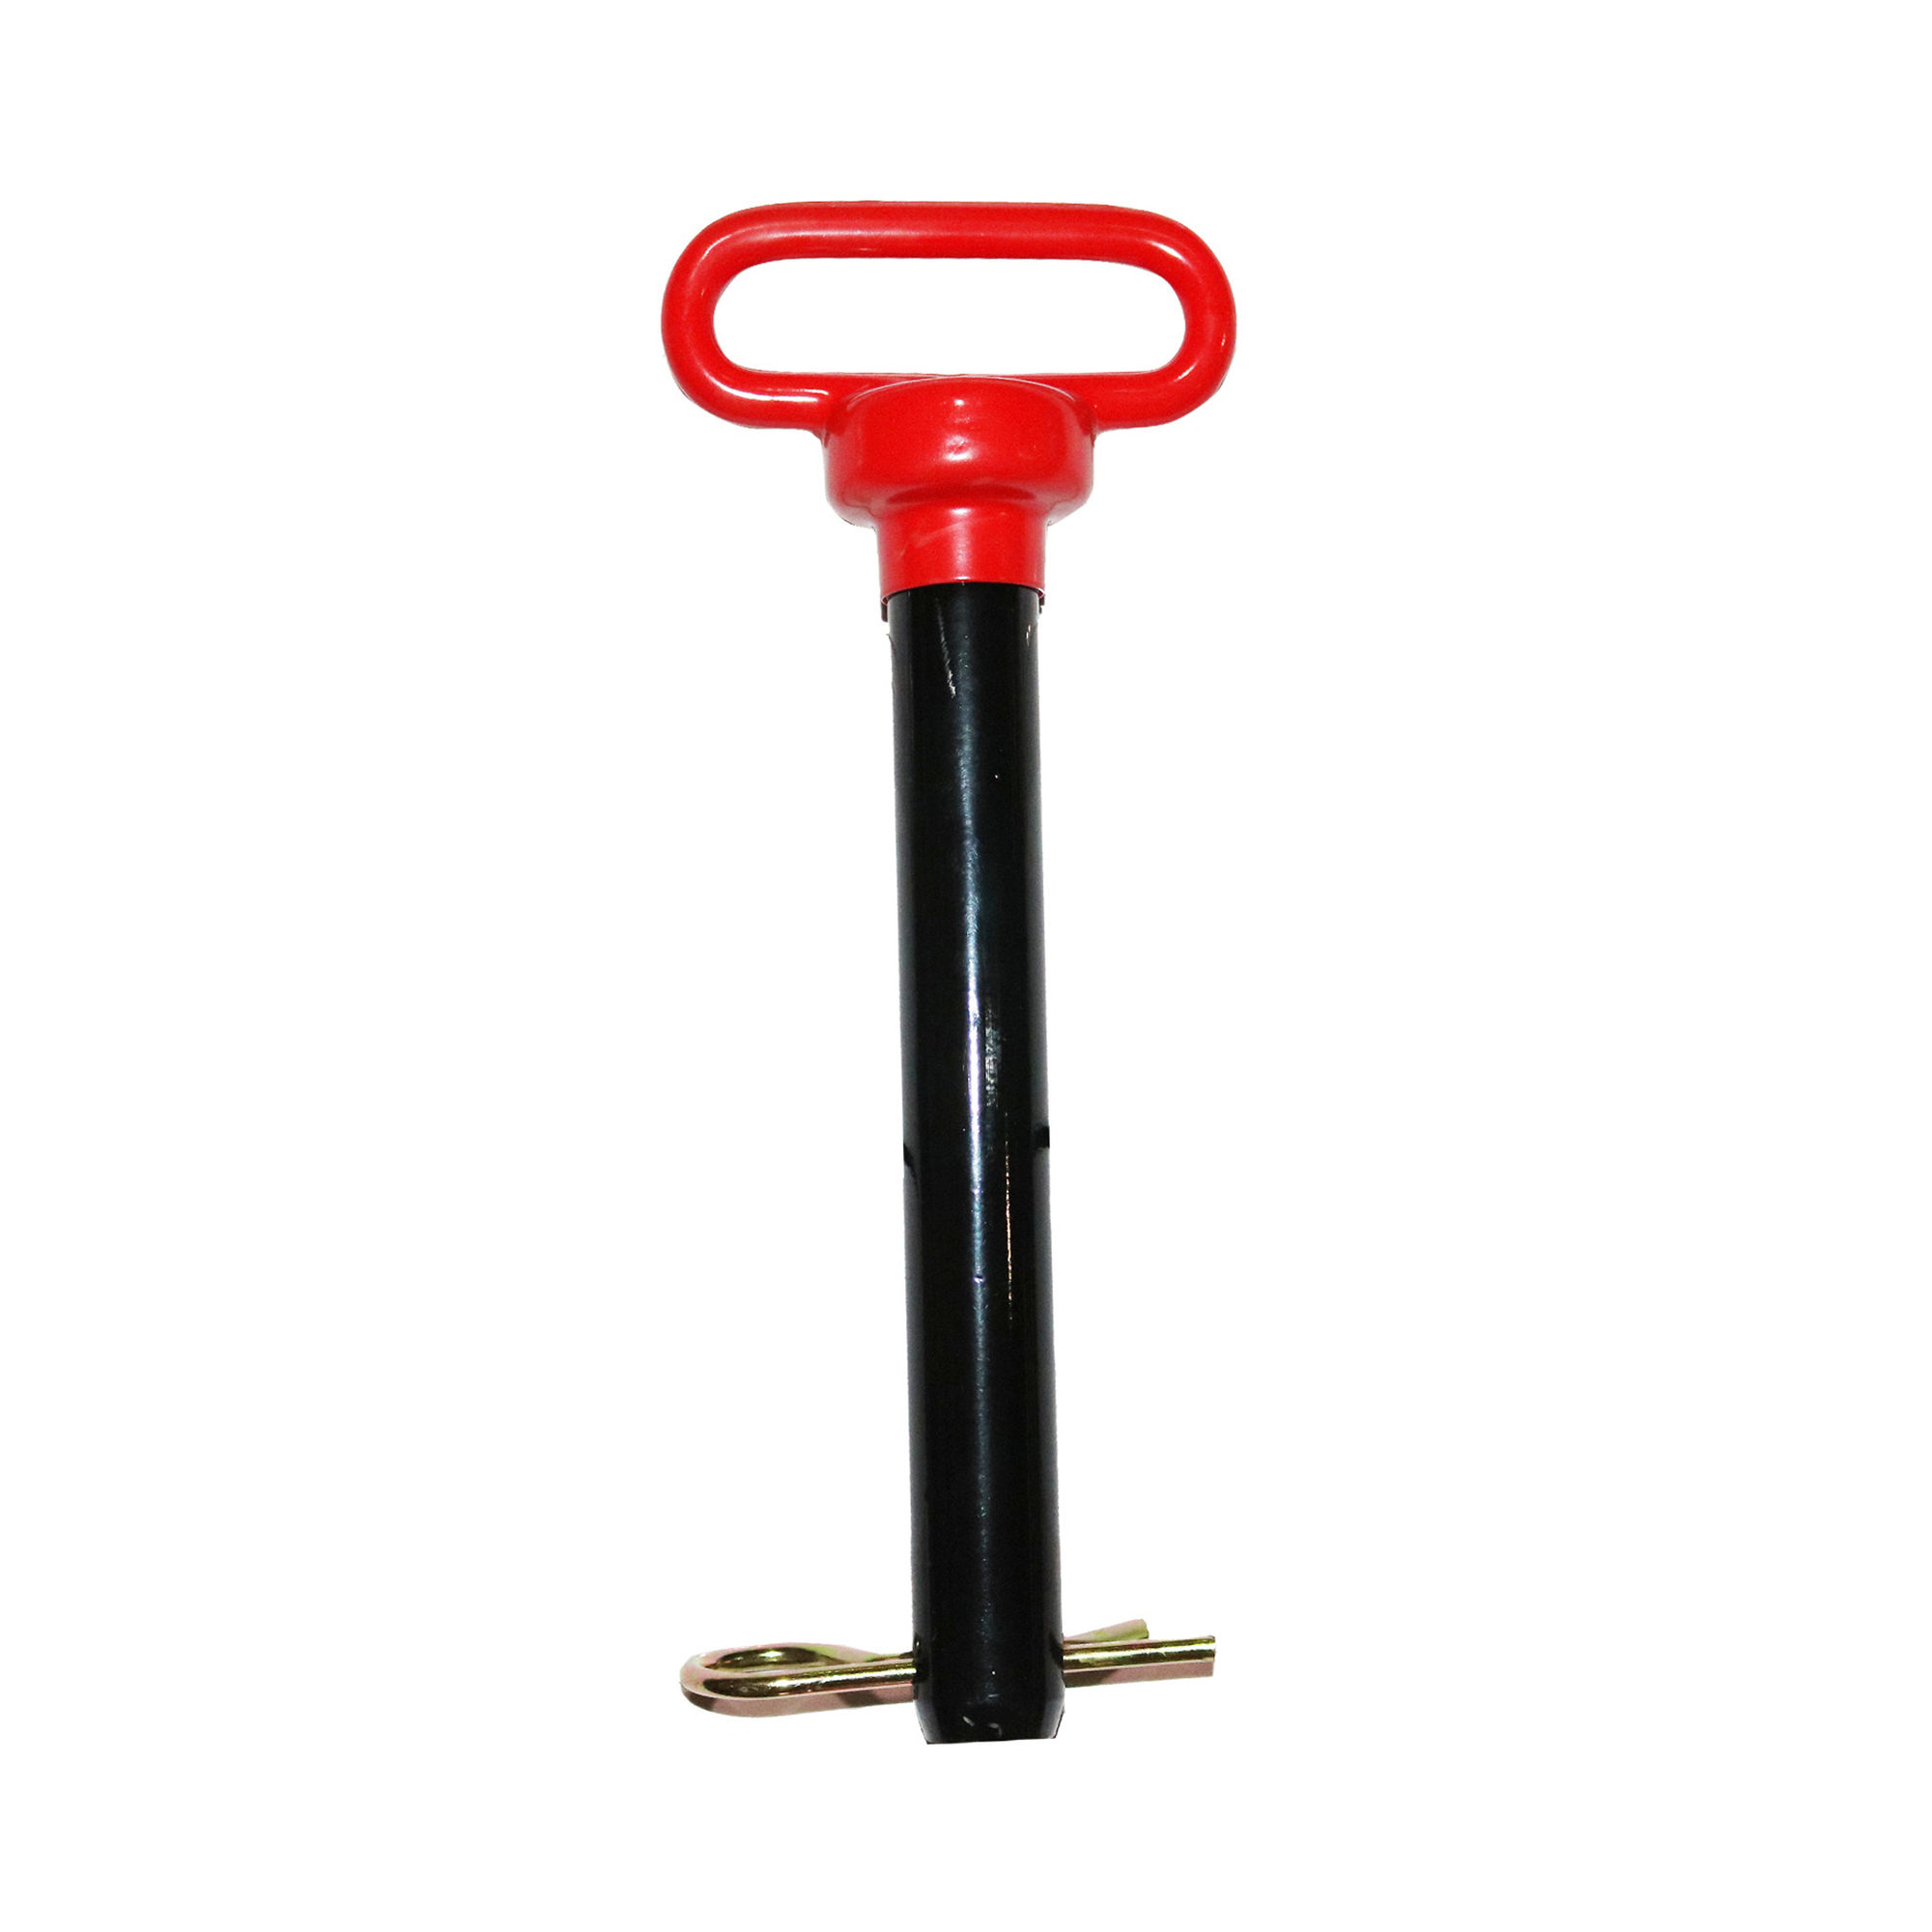 Braber Equipment, Grade 5 Forged Hitch Pin 1-1/8Inch Diameter, Usable Length 8.5 in, Model 707HPR